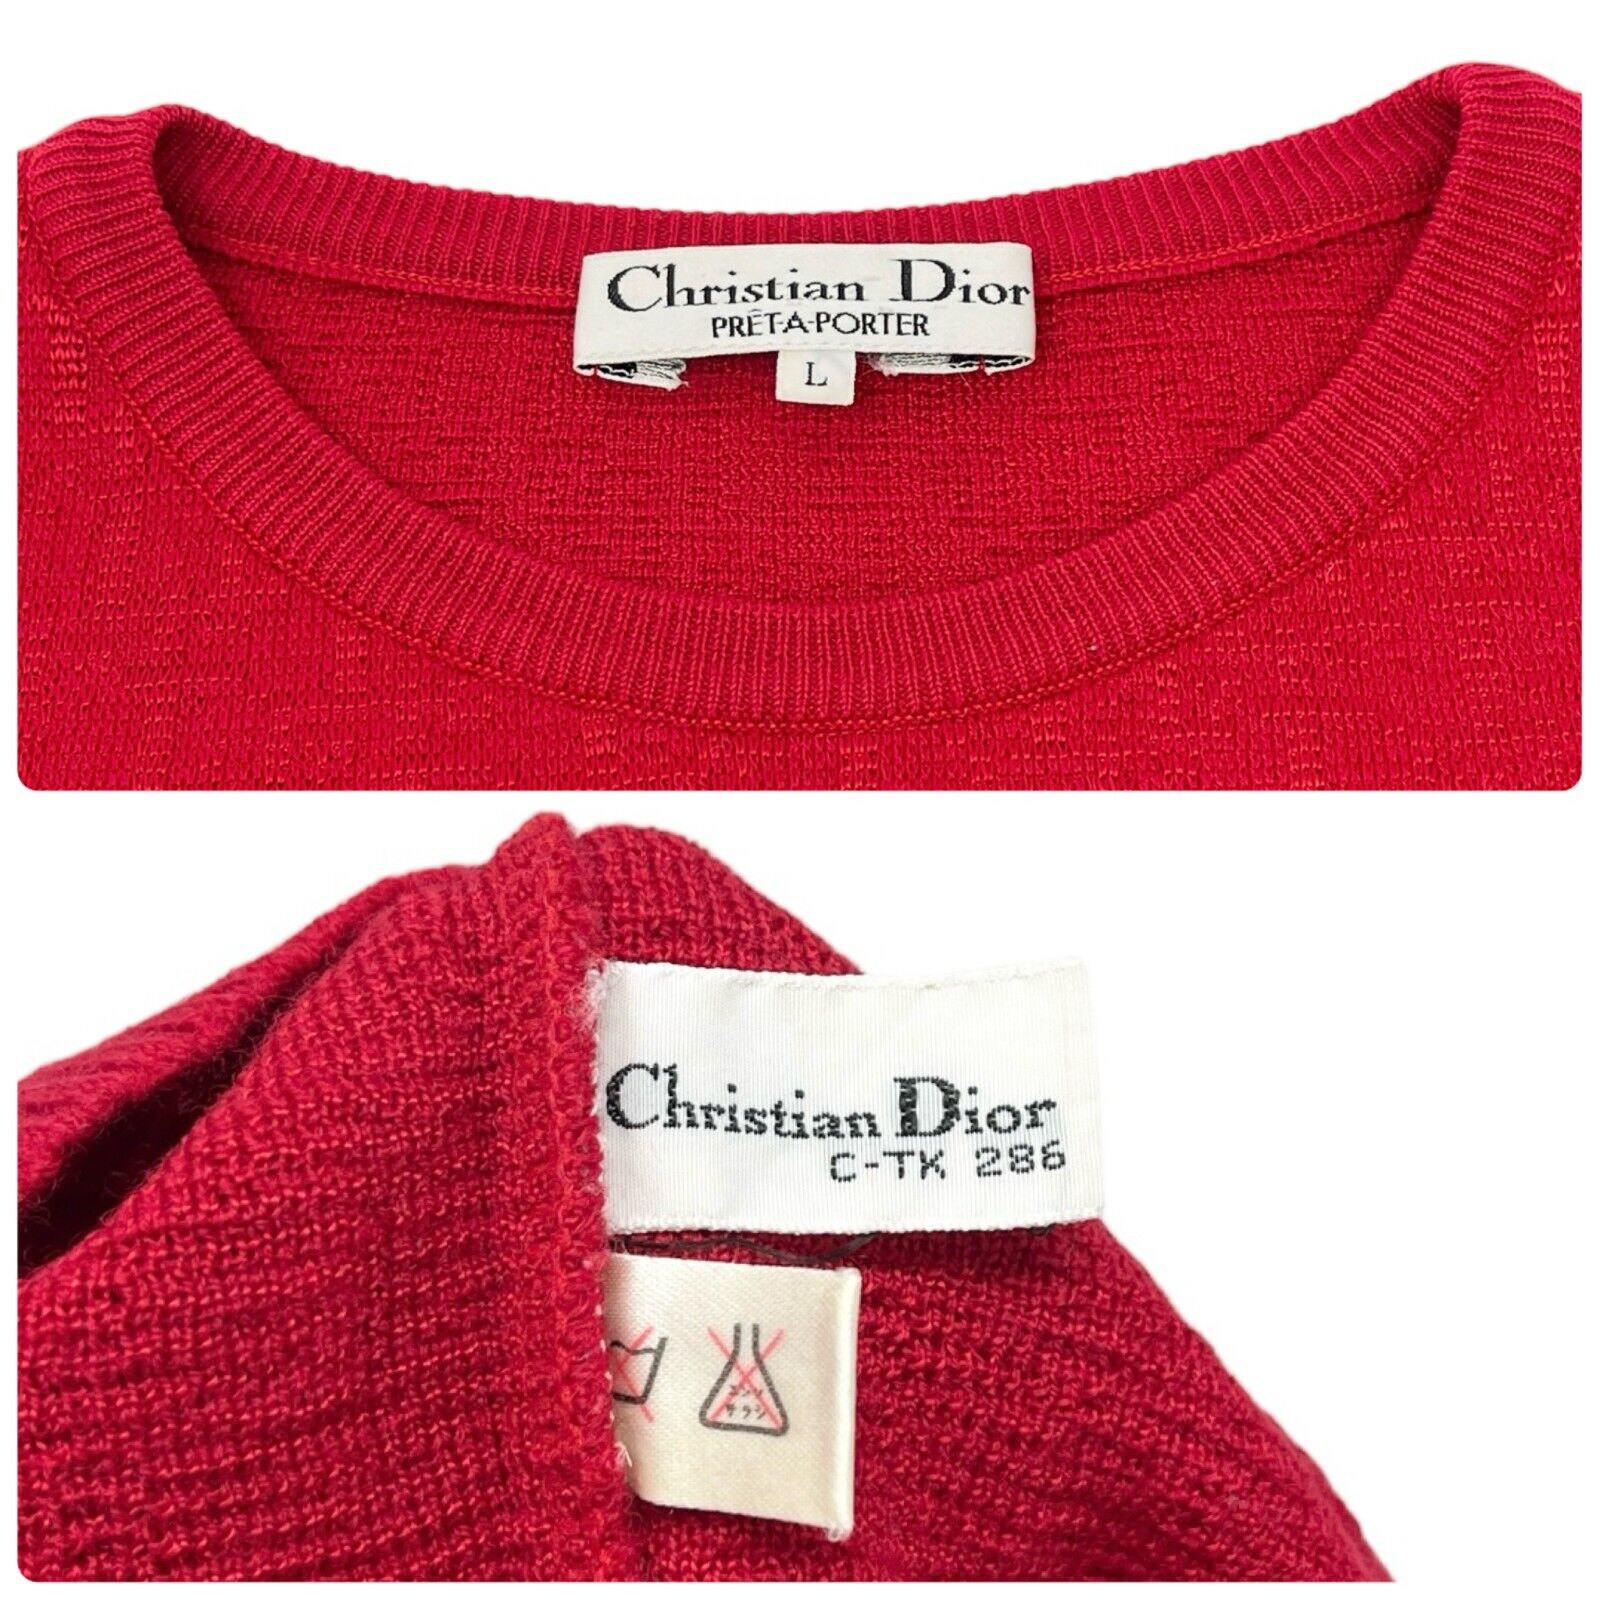 Christian Dior Vintage Trotter Monogram Knit Sweater #L Top Red Wool Rank AB